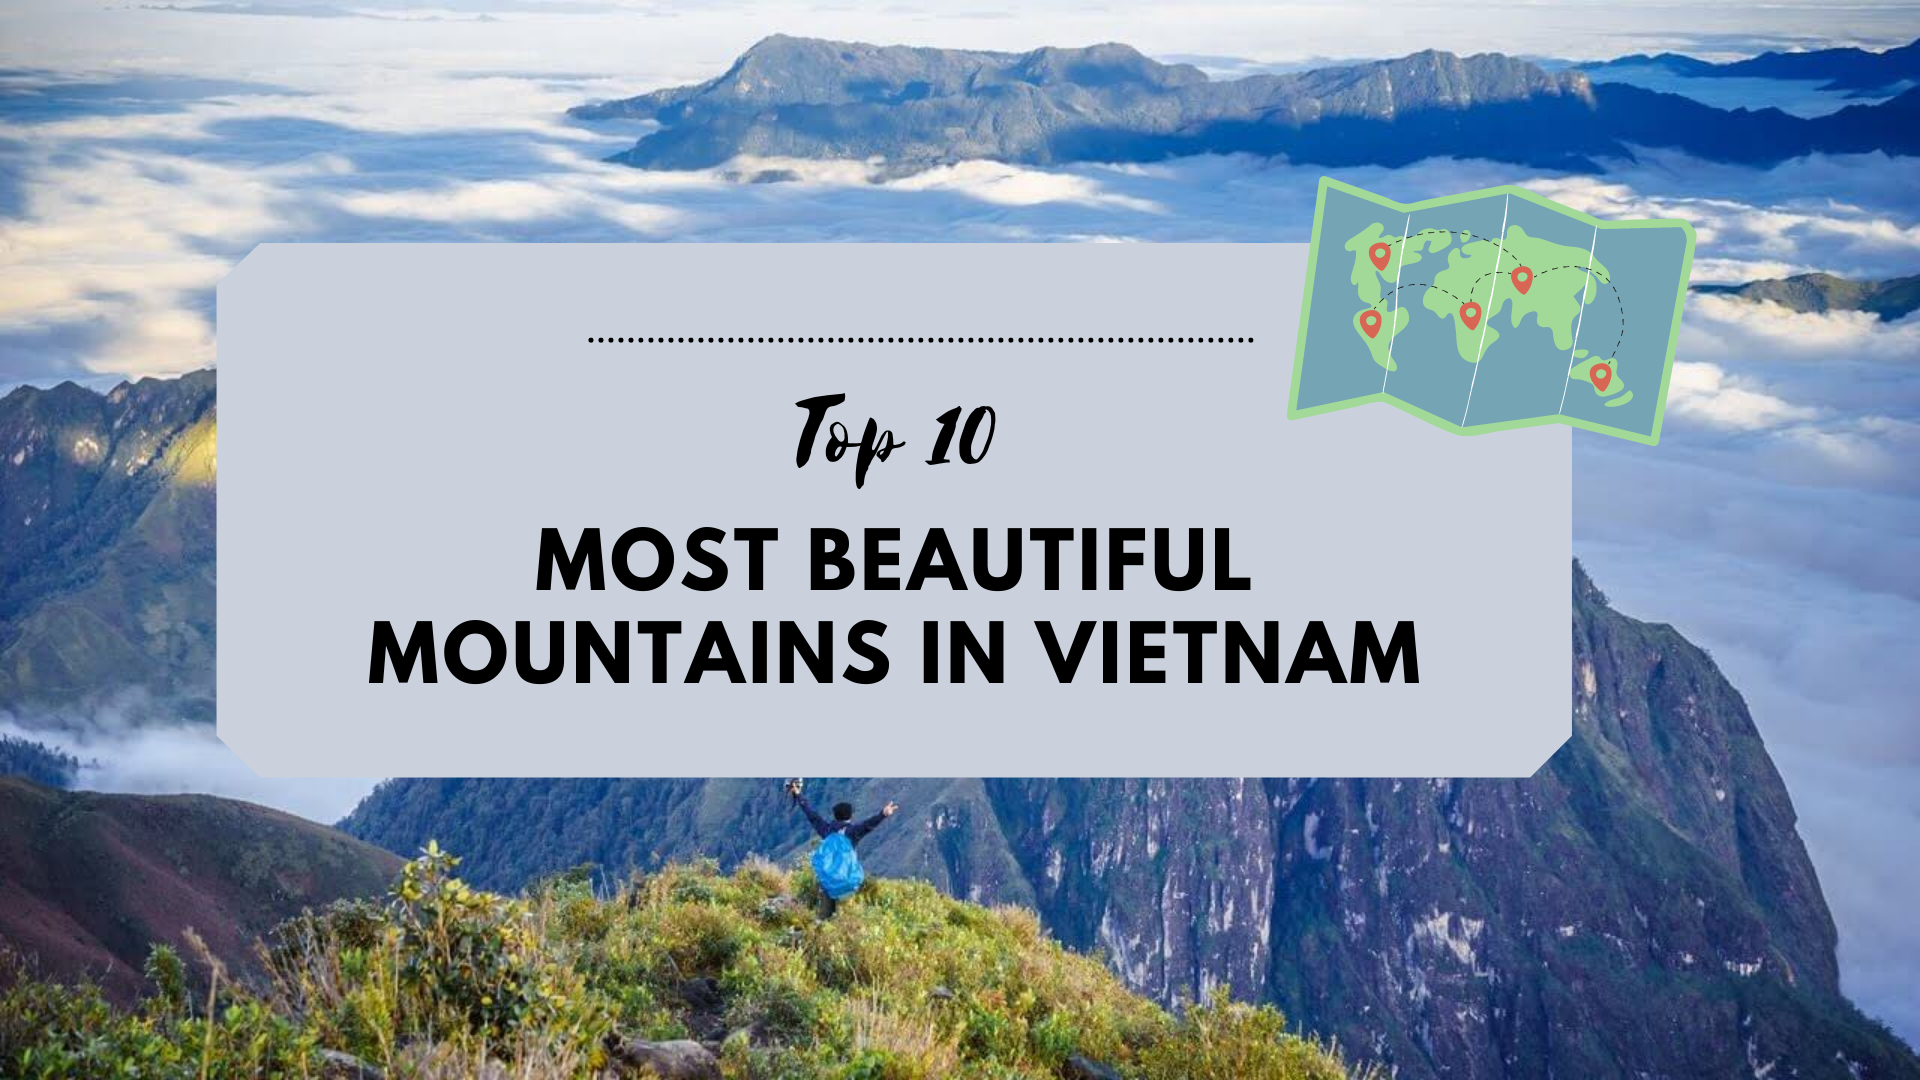 Top 10 most beautiful mountains in Vietnam